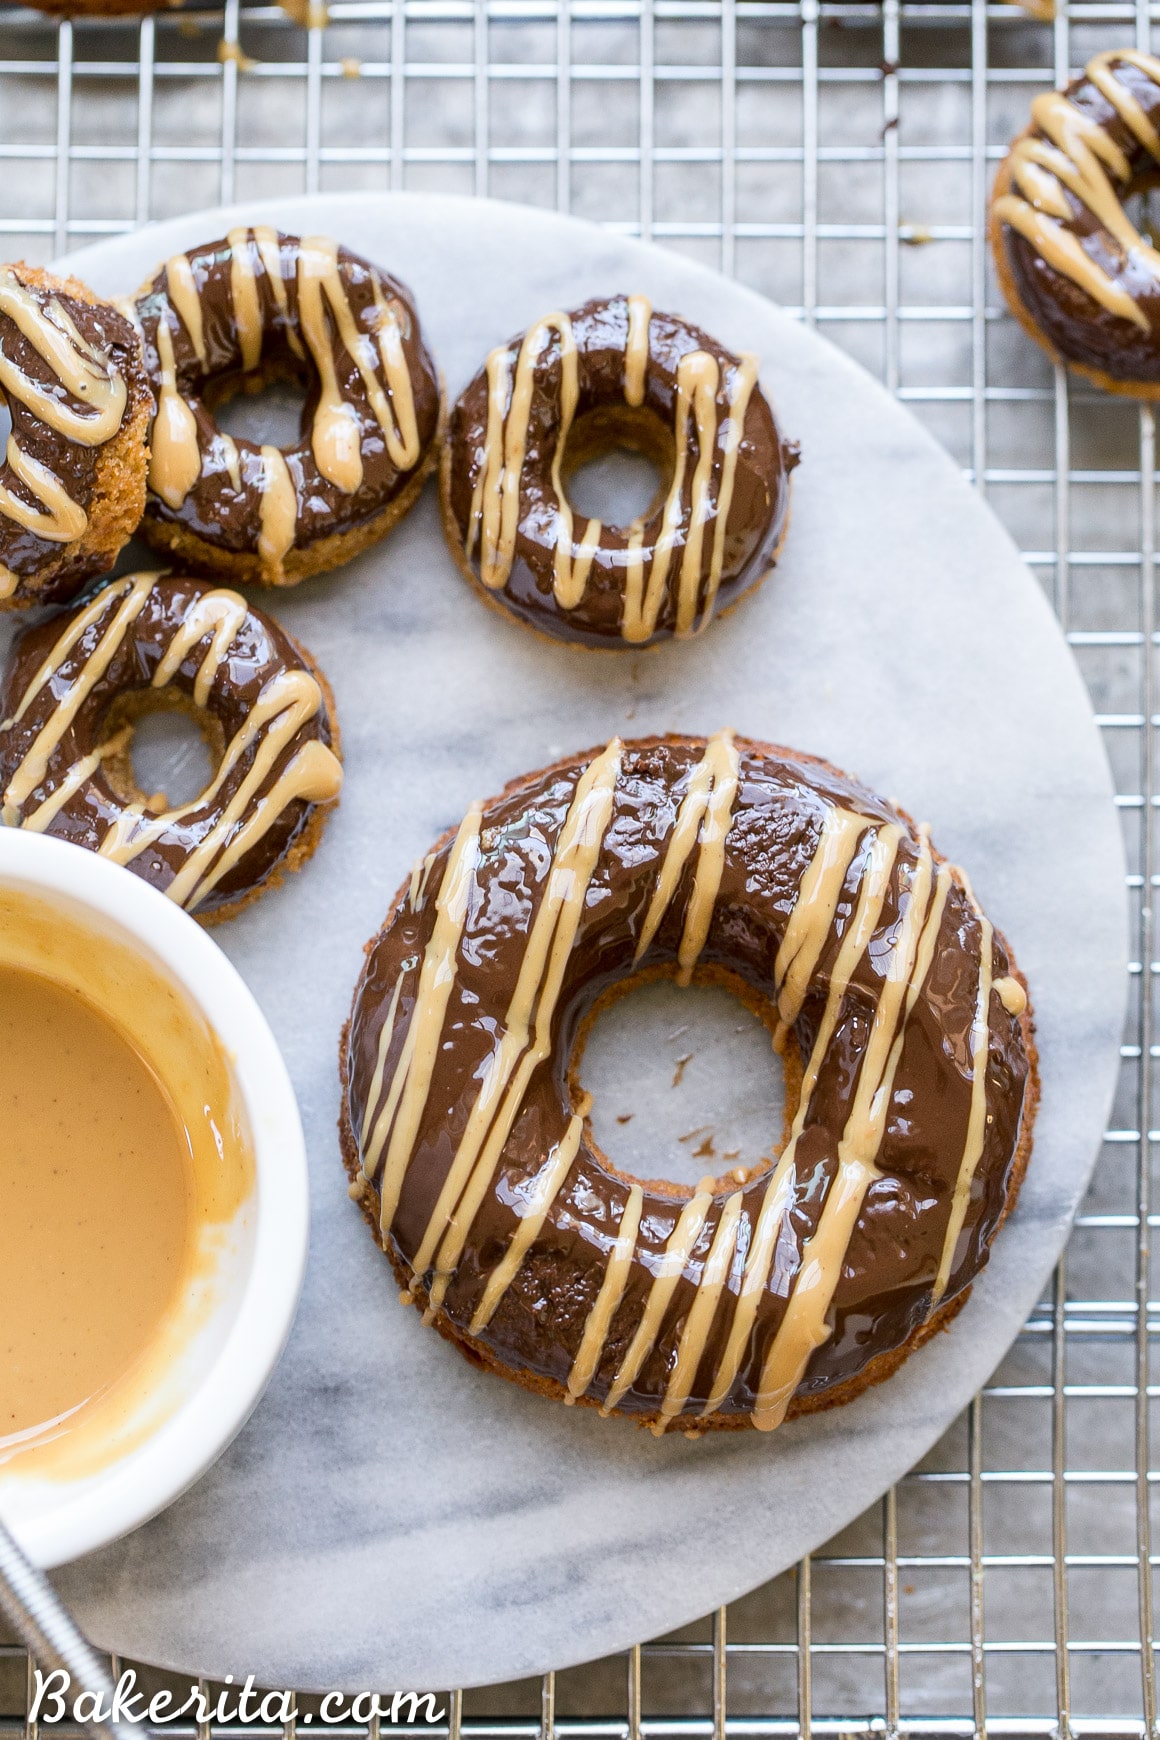 These Peanut Butter Banana Donuts have a dark chocolate glaze topped with a drizzle of peanut butter! They're baked instead of fried, and they are gluten-free, refined sugar-free, and vegan, making them way healthier than your average donut.